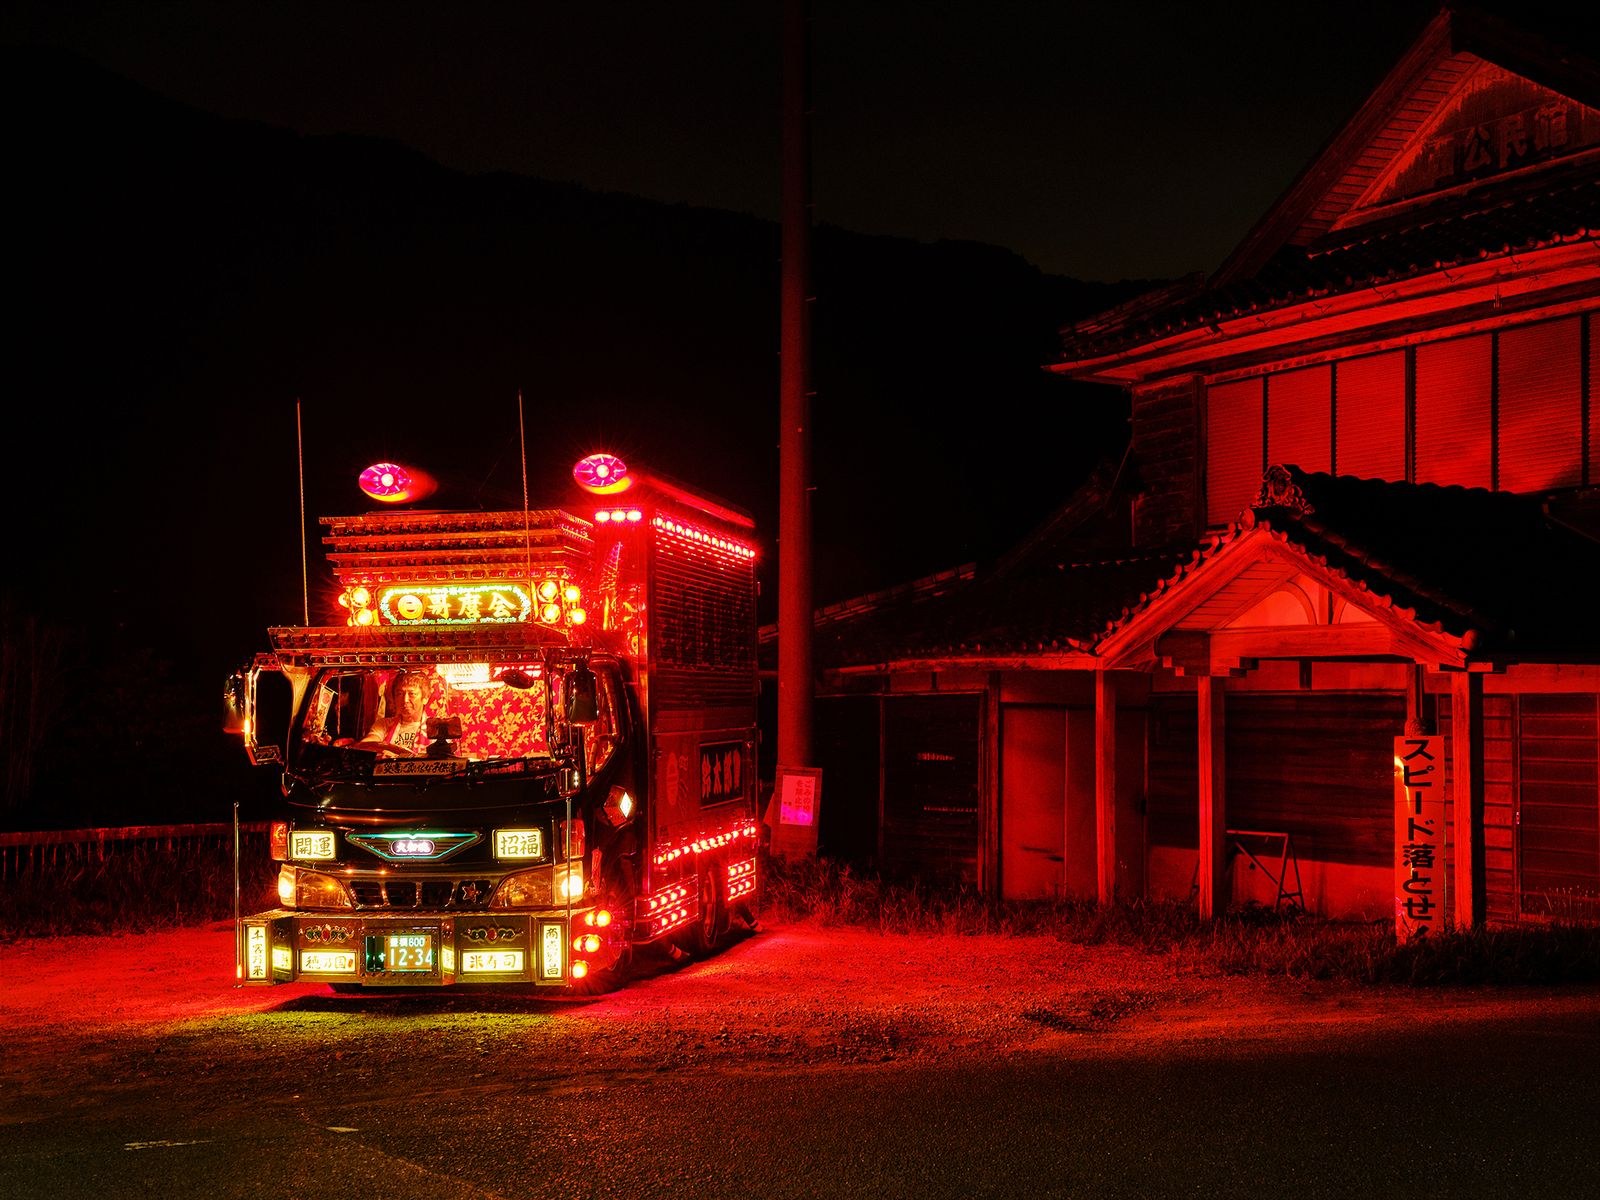 © Julie Glassberg - Shirai san's truck illuminating an old house with its red lights. Aichi prefecture, Japan.